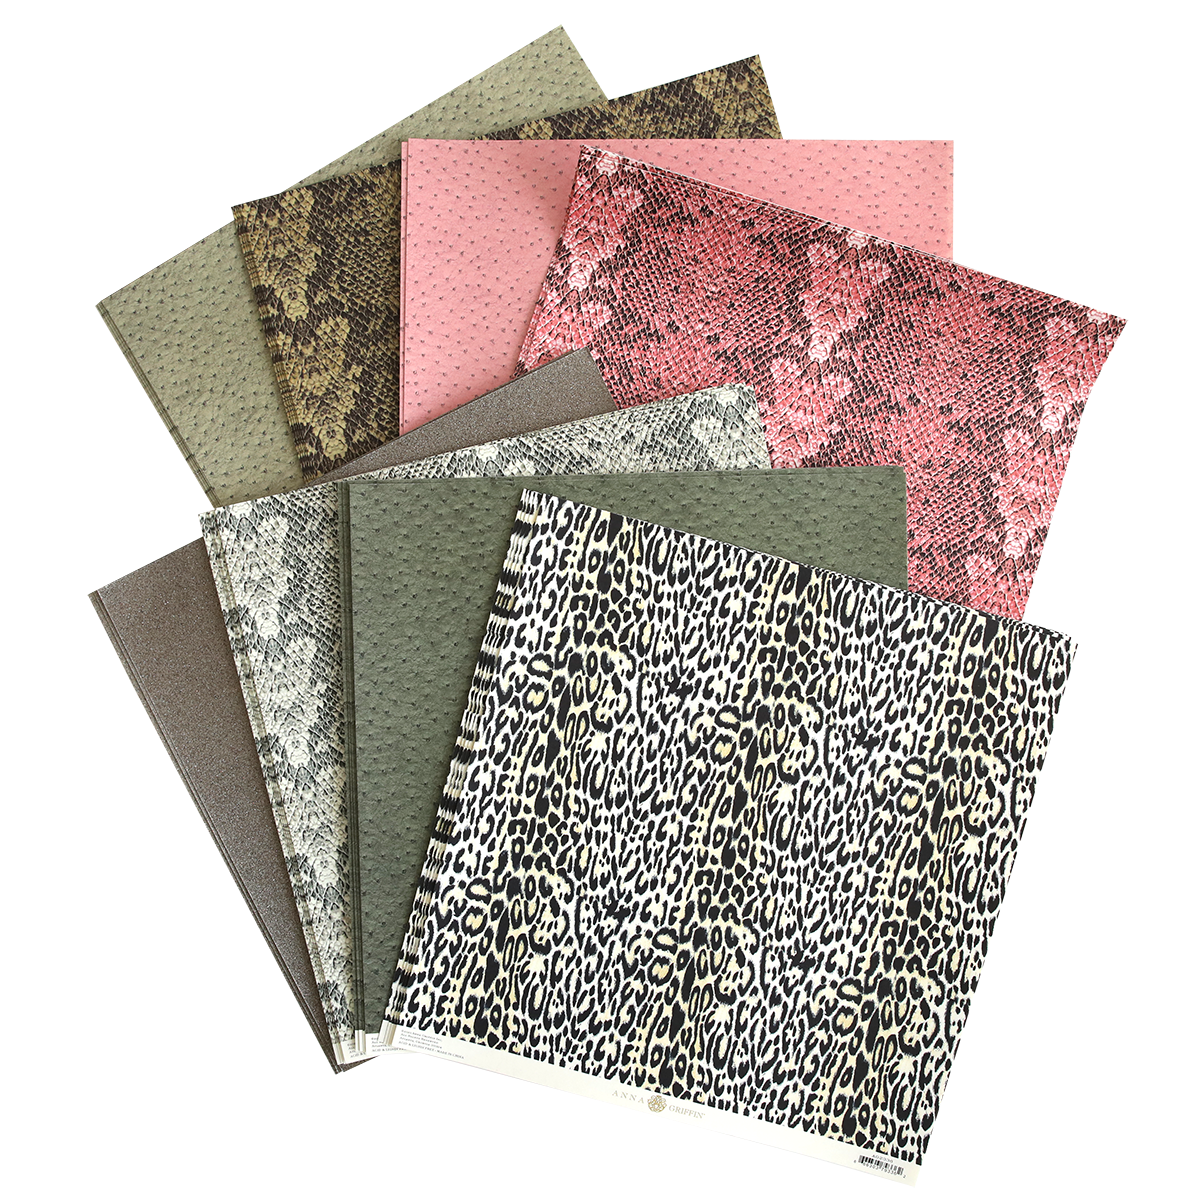 An assortment of textured Animal Print 12x12 cardstock with various designs for papercraft projects.